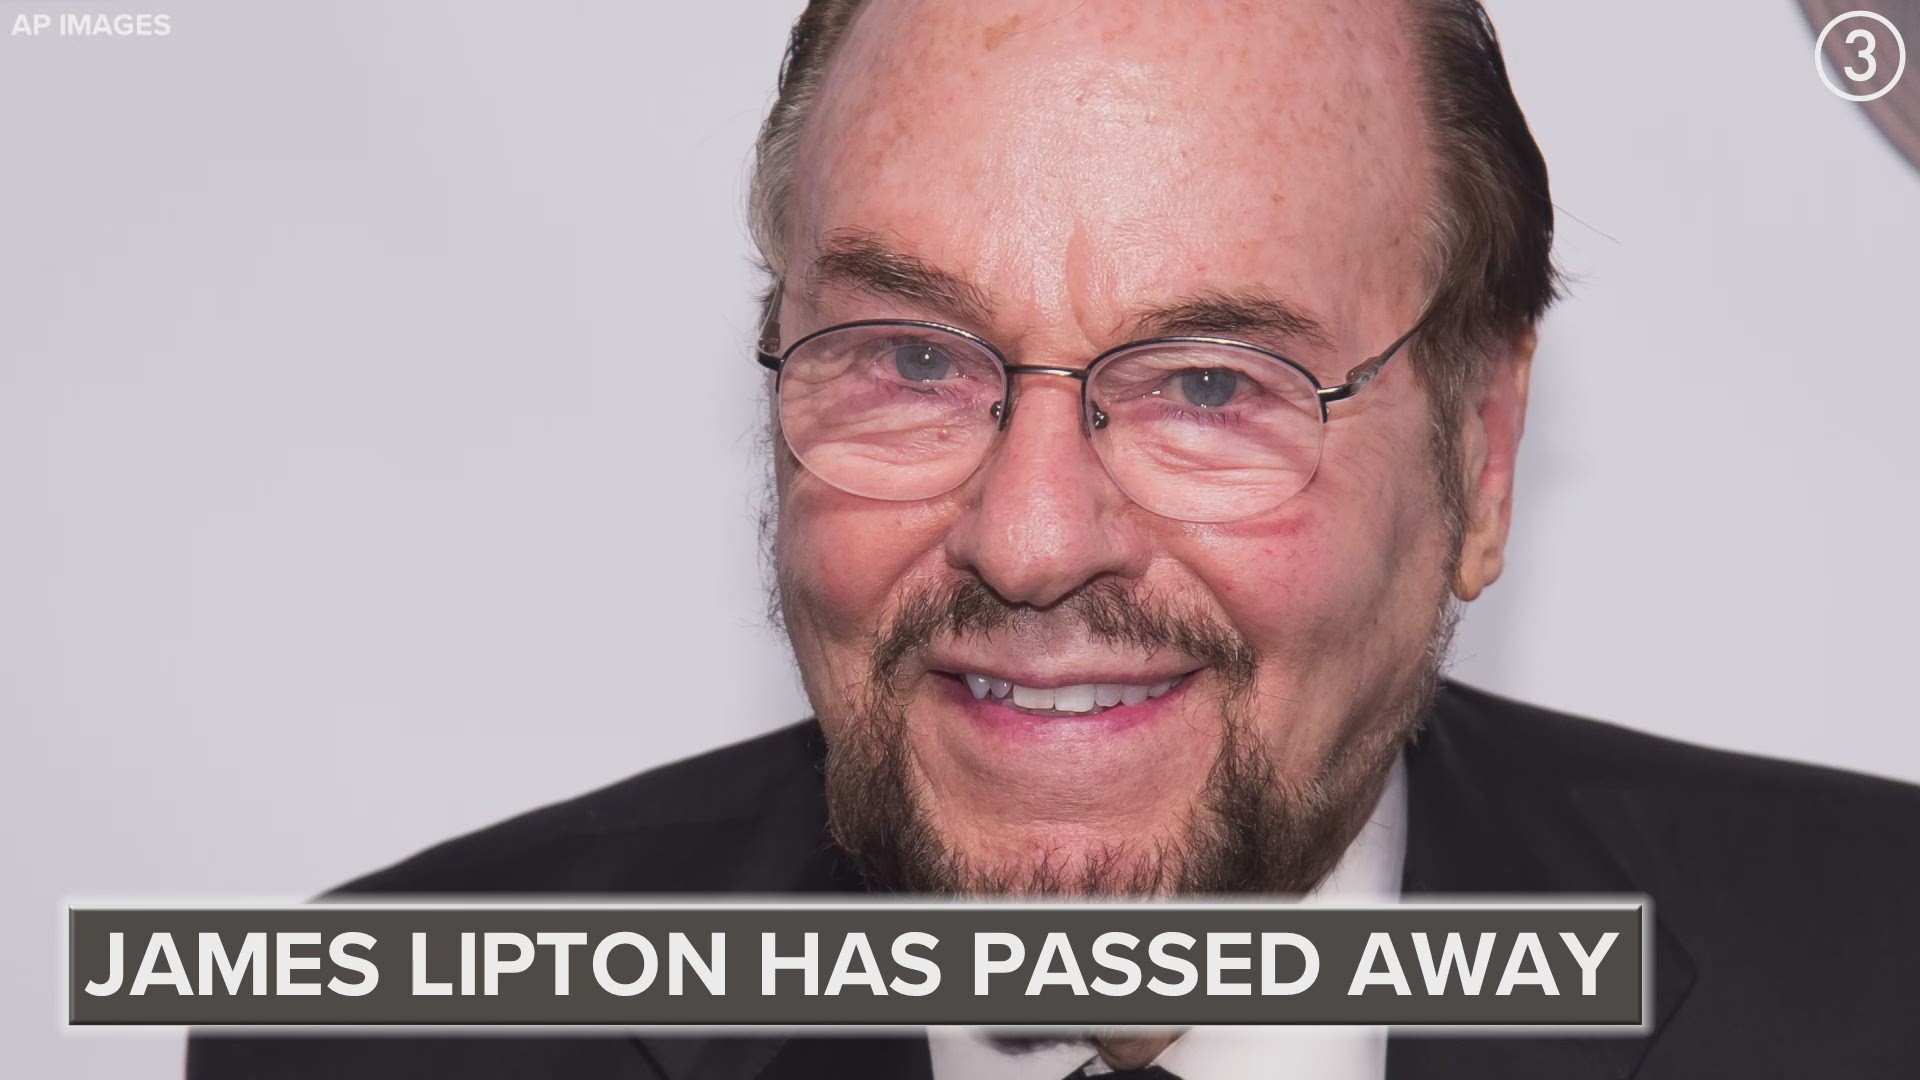 For 23 seasons, James Lipton served as host of 'Inside the Actors Studio.'  Rest in peace, James.